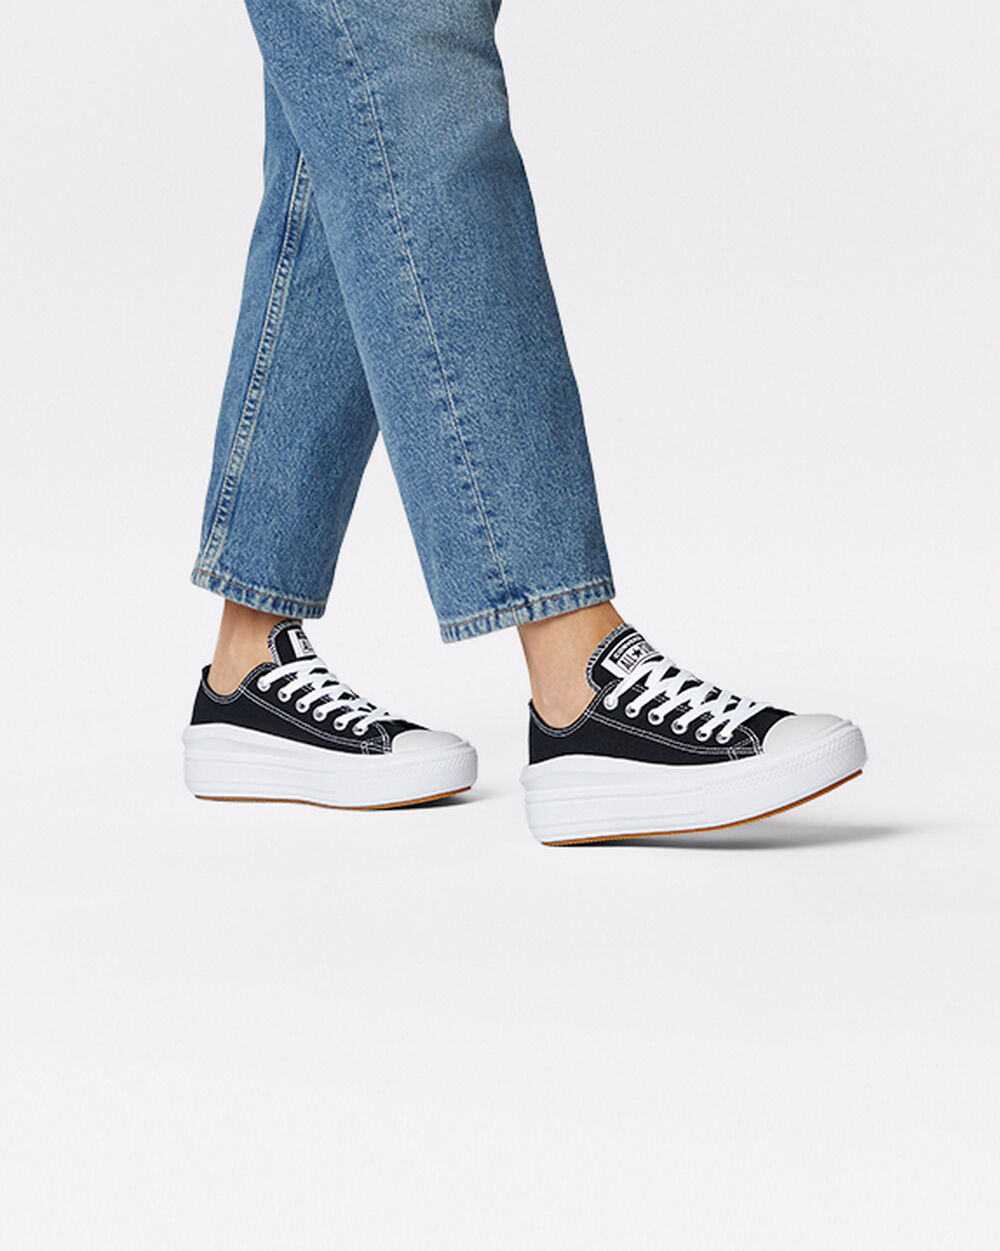 Tenis Converse Chuck Taylor All Star Move Mujer Negros Blancos | Mexico-75426